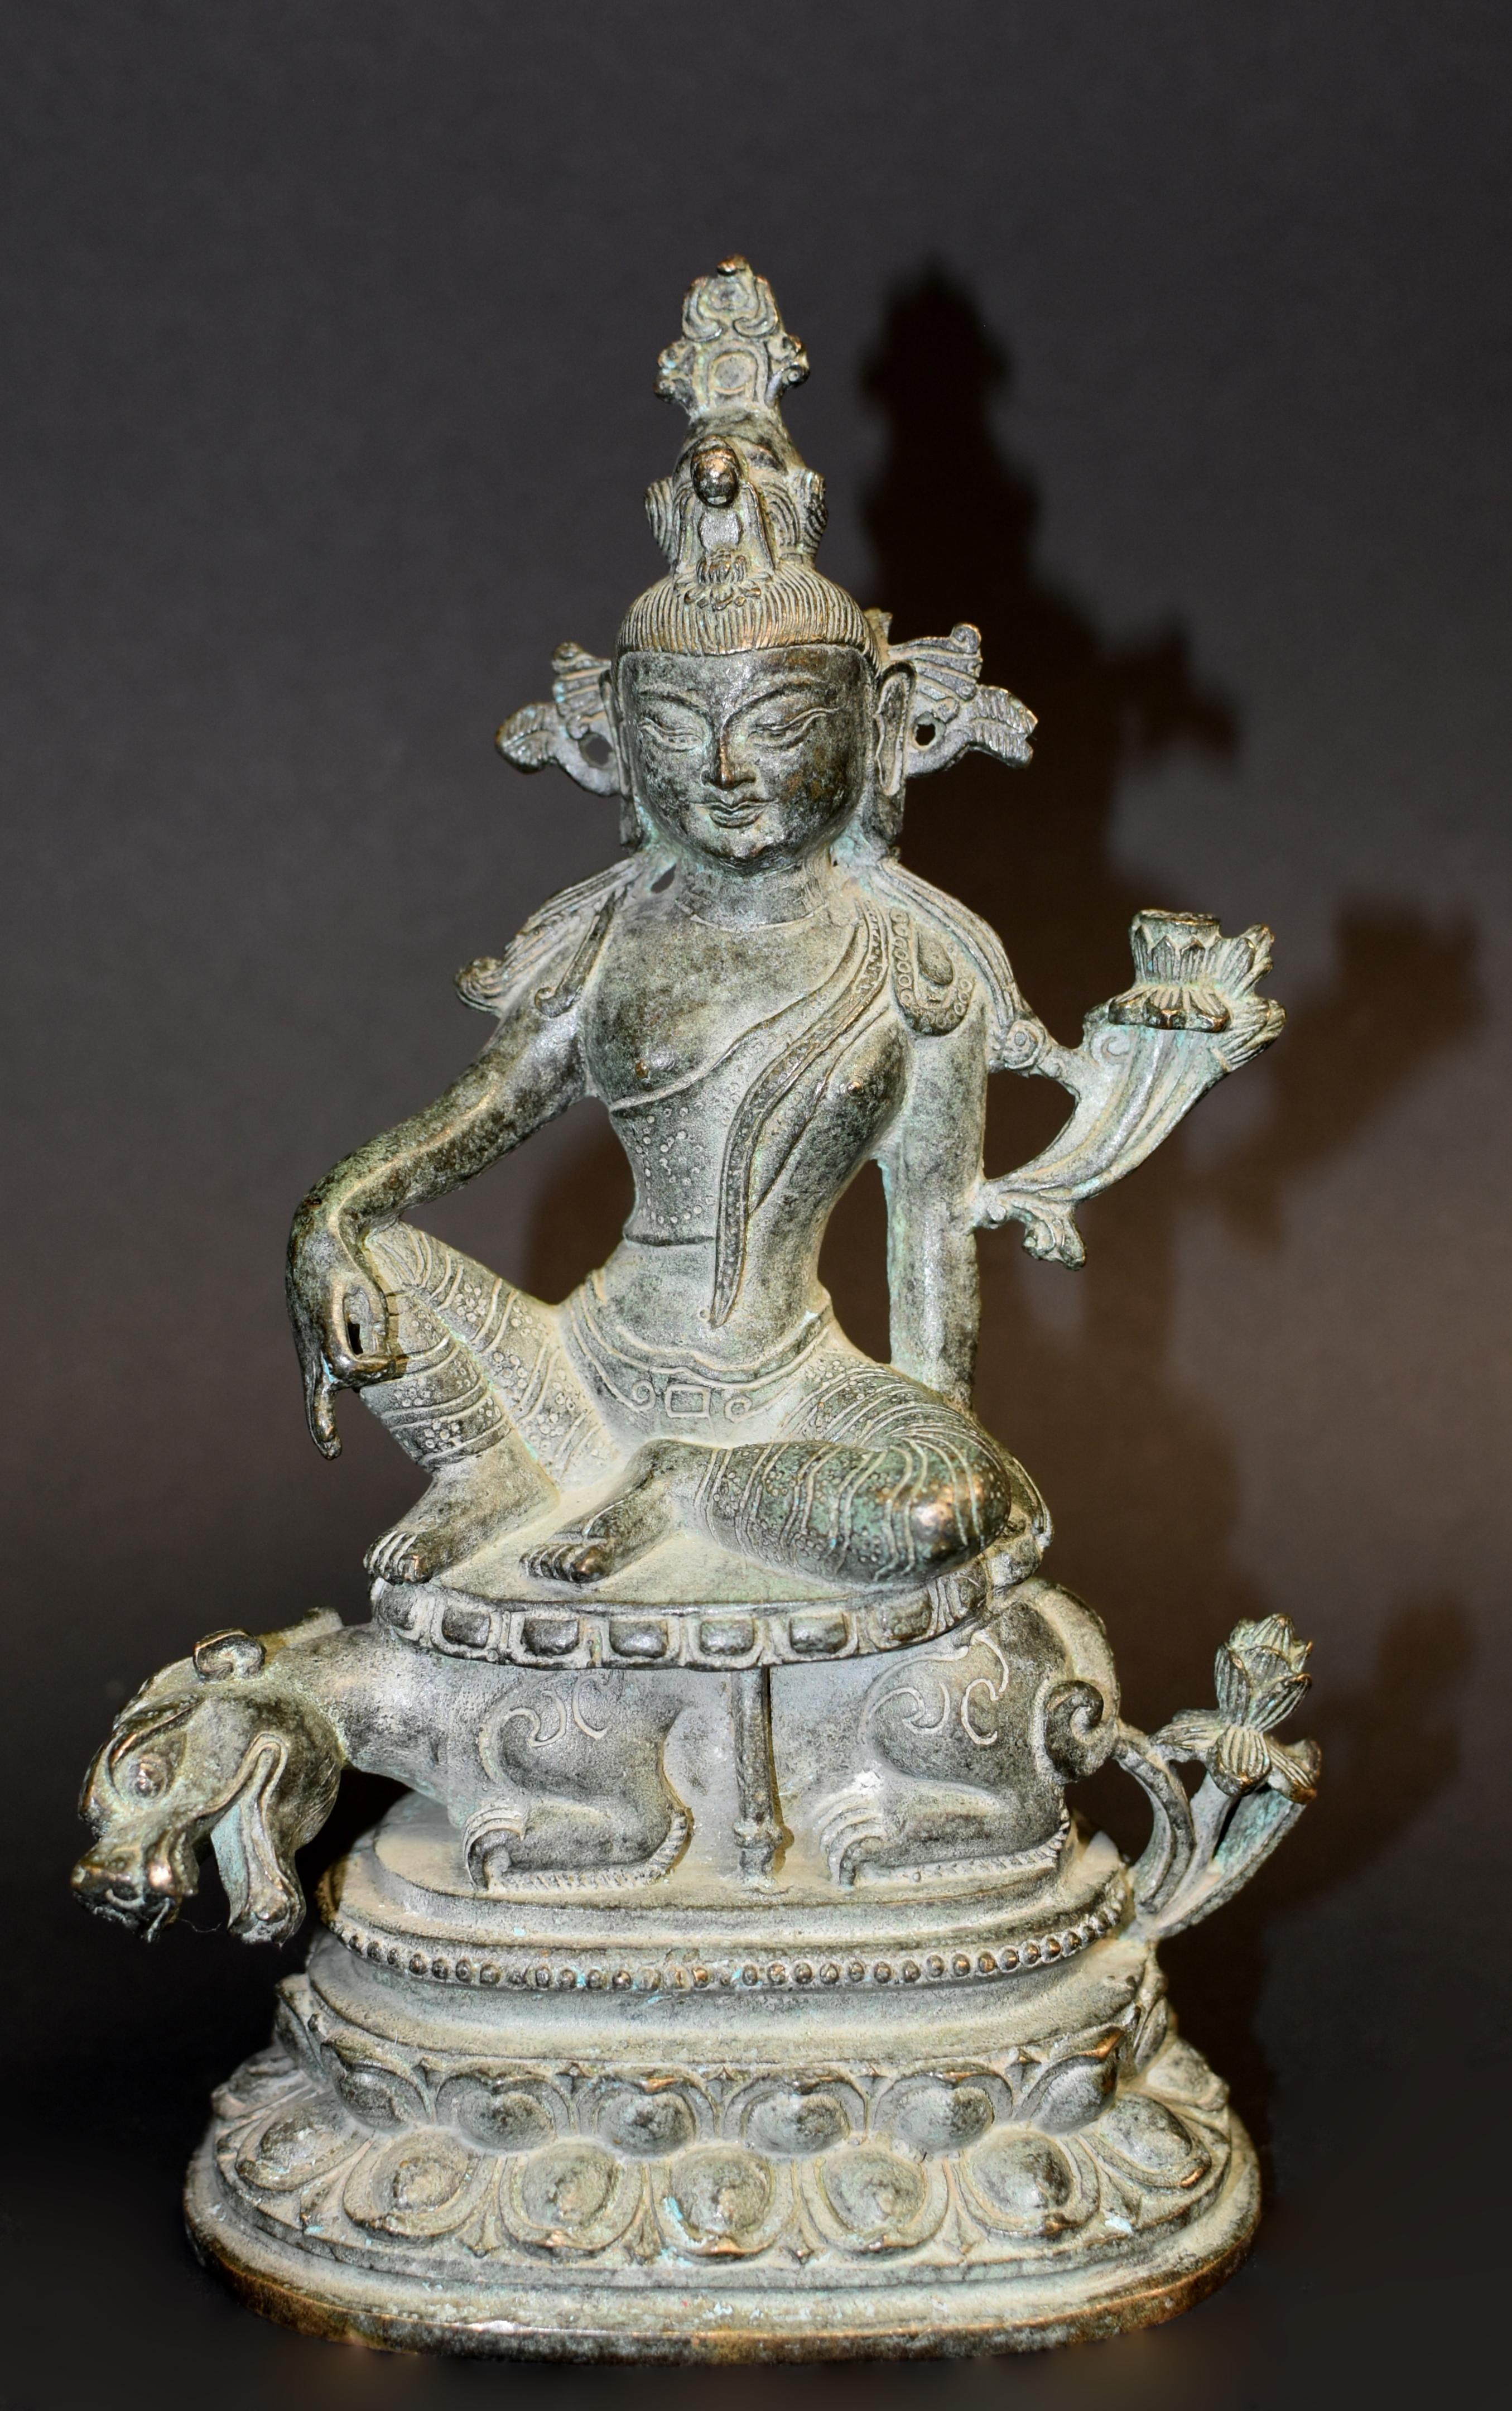 A very rare statue of the Tibetan/Hindu Buddha Indra. Indra is the King of Gods who possesses mighty power to destroy evil and deception. He is the most important and celebrated deity in Vedic Hinduism. Seated with the right knee up on top of a